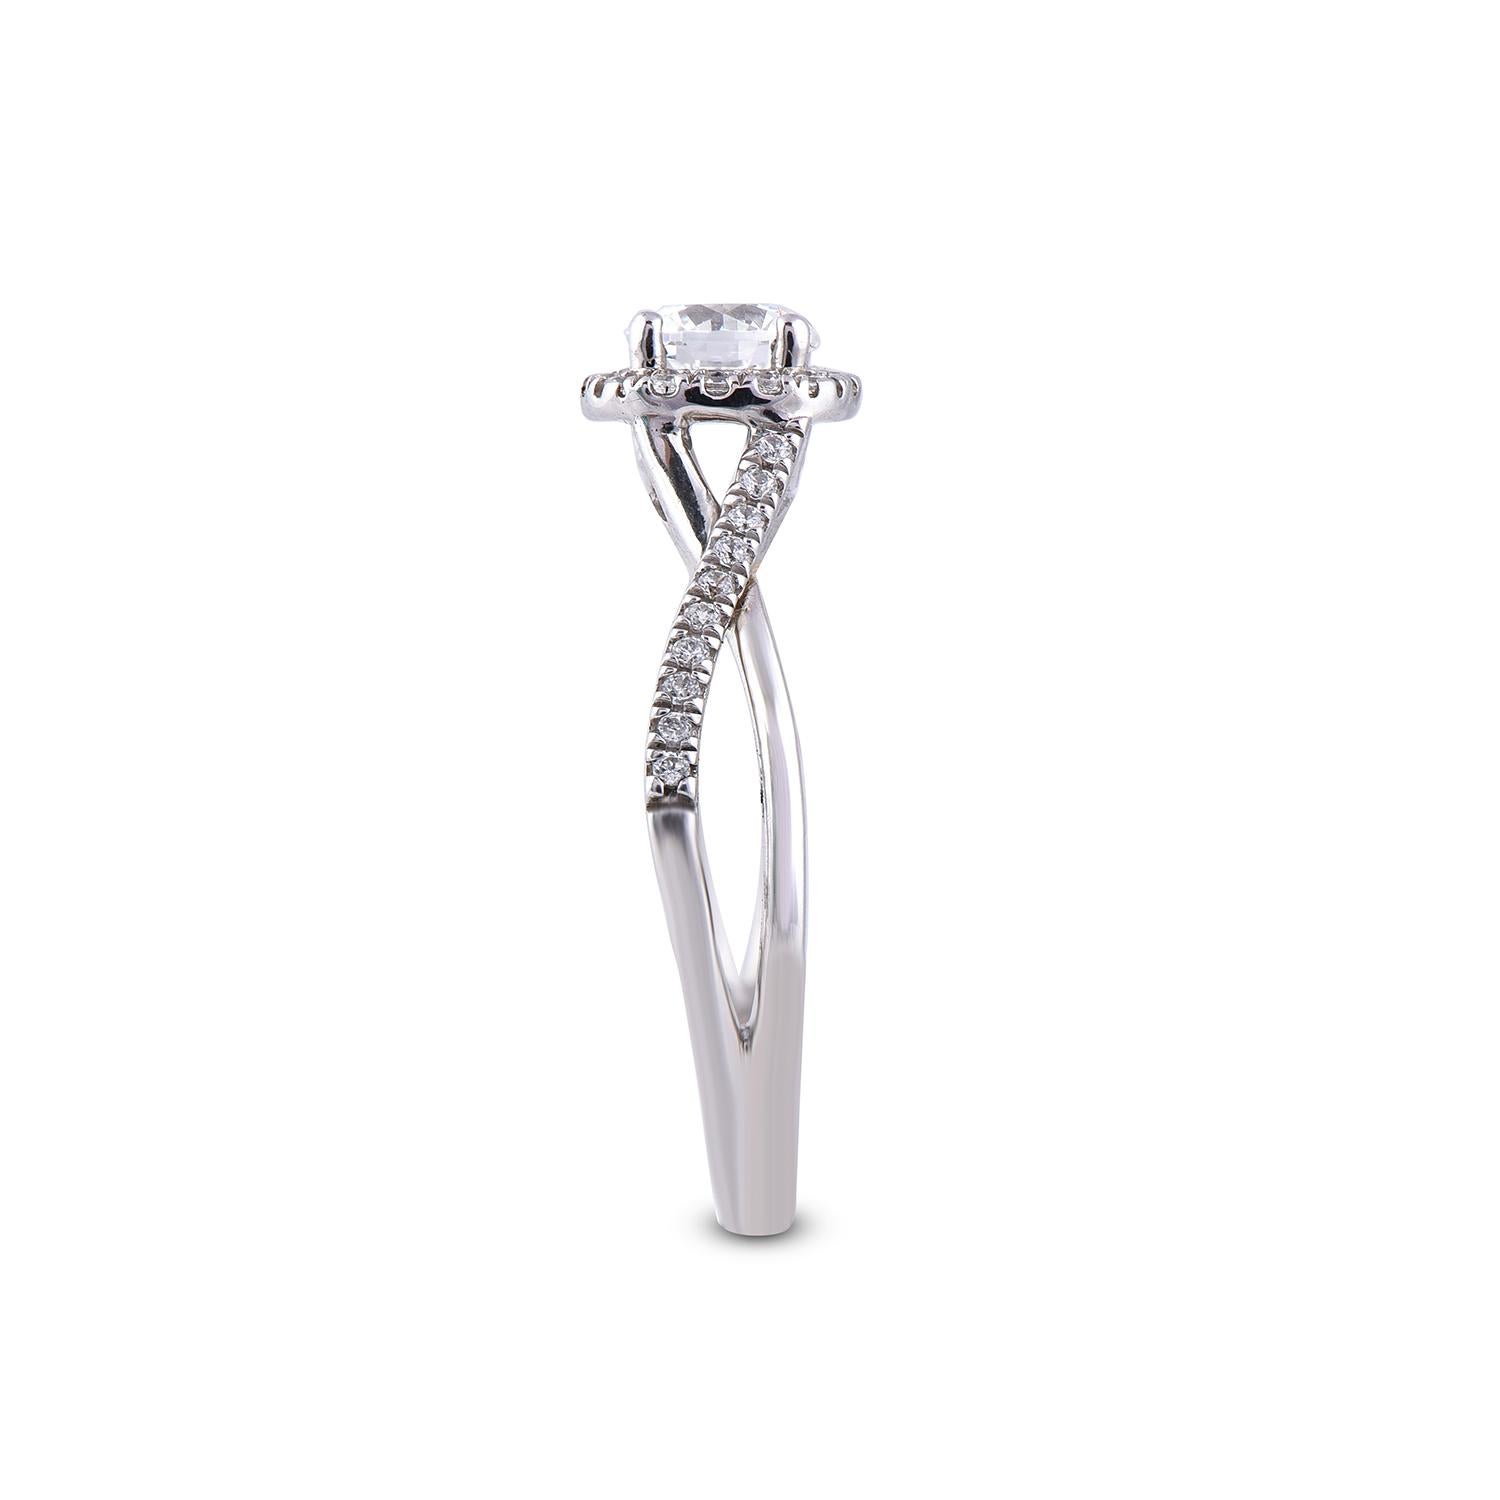 TJD 0.75 Carat Round Diamond 18 Karat White Gold Halo Crisscross Fashion Ring In New Condition For Sale In New York, NY